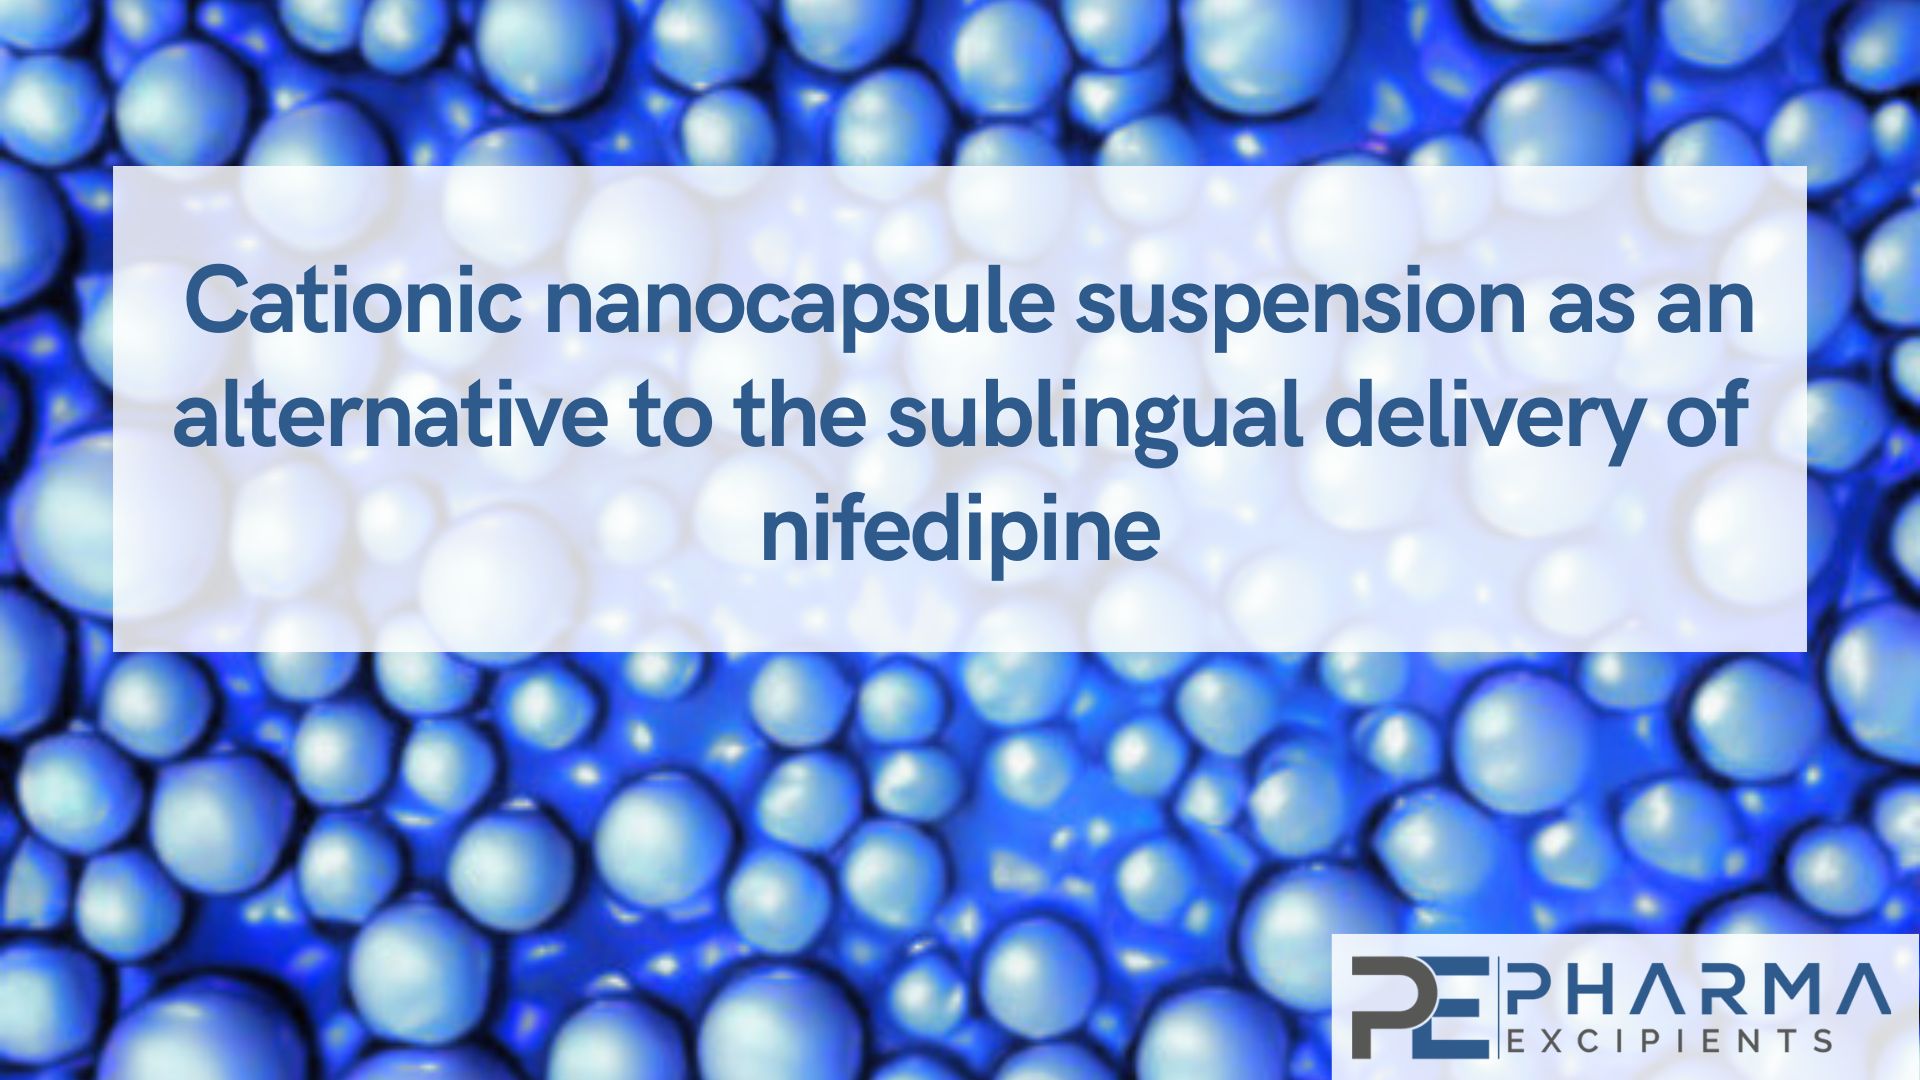 Cationic nanocapsule suspension as an alternative to the sublingual delivery of nifedipine